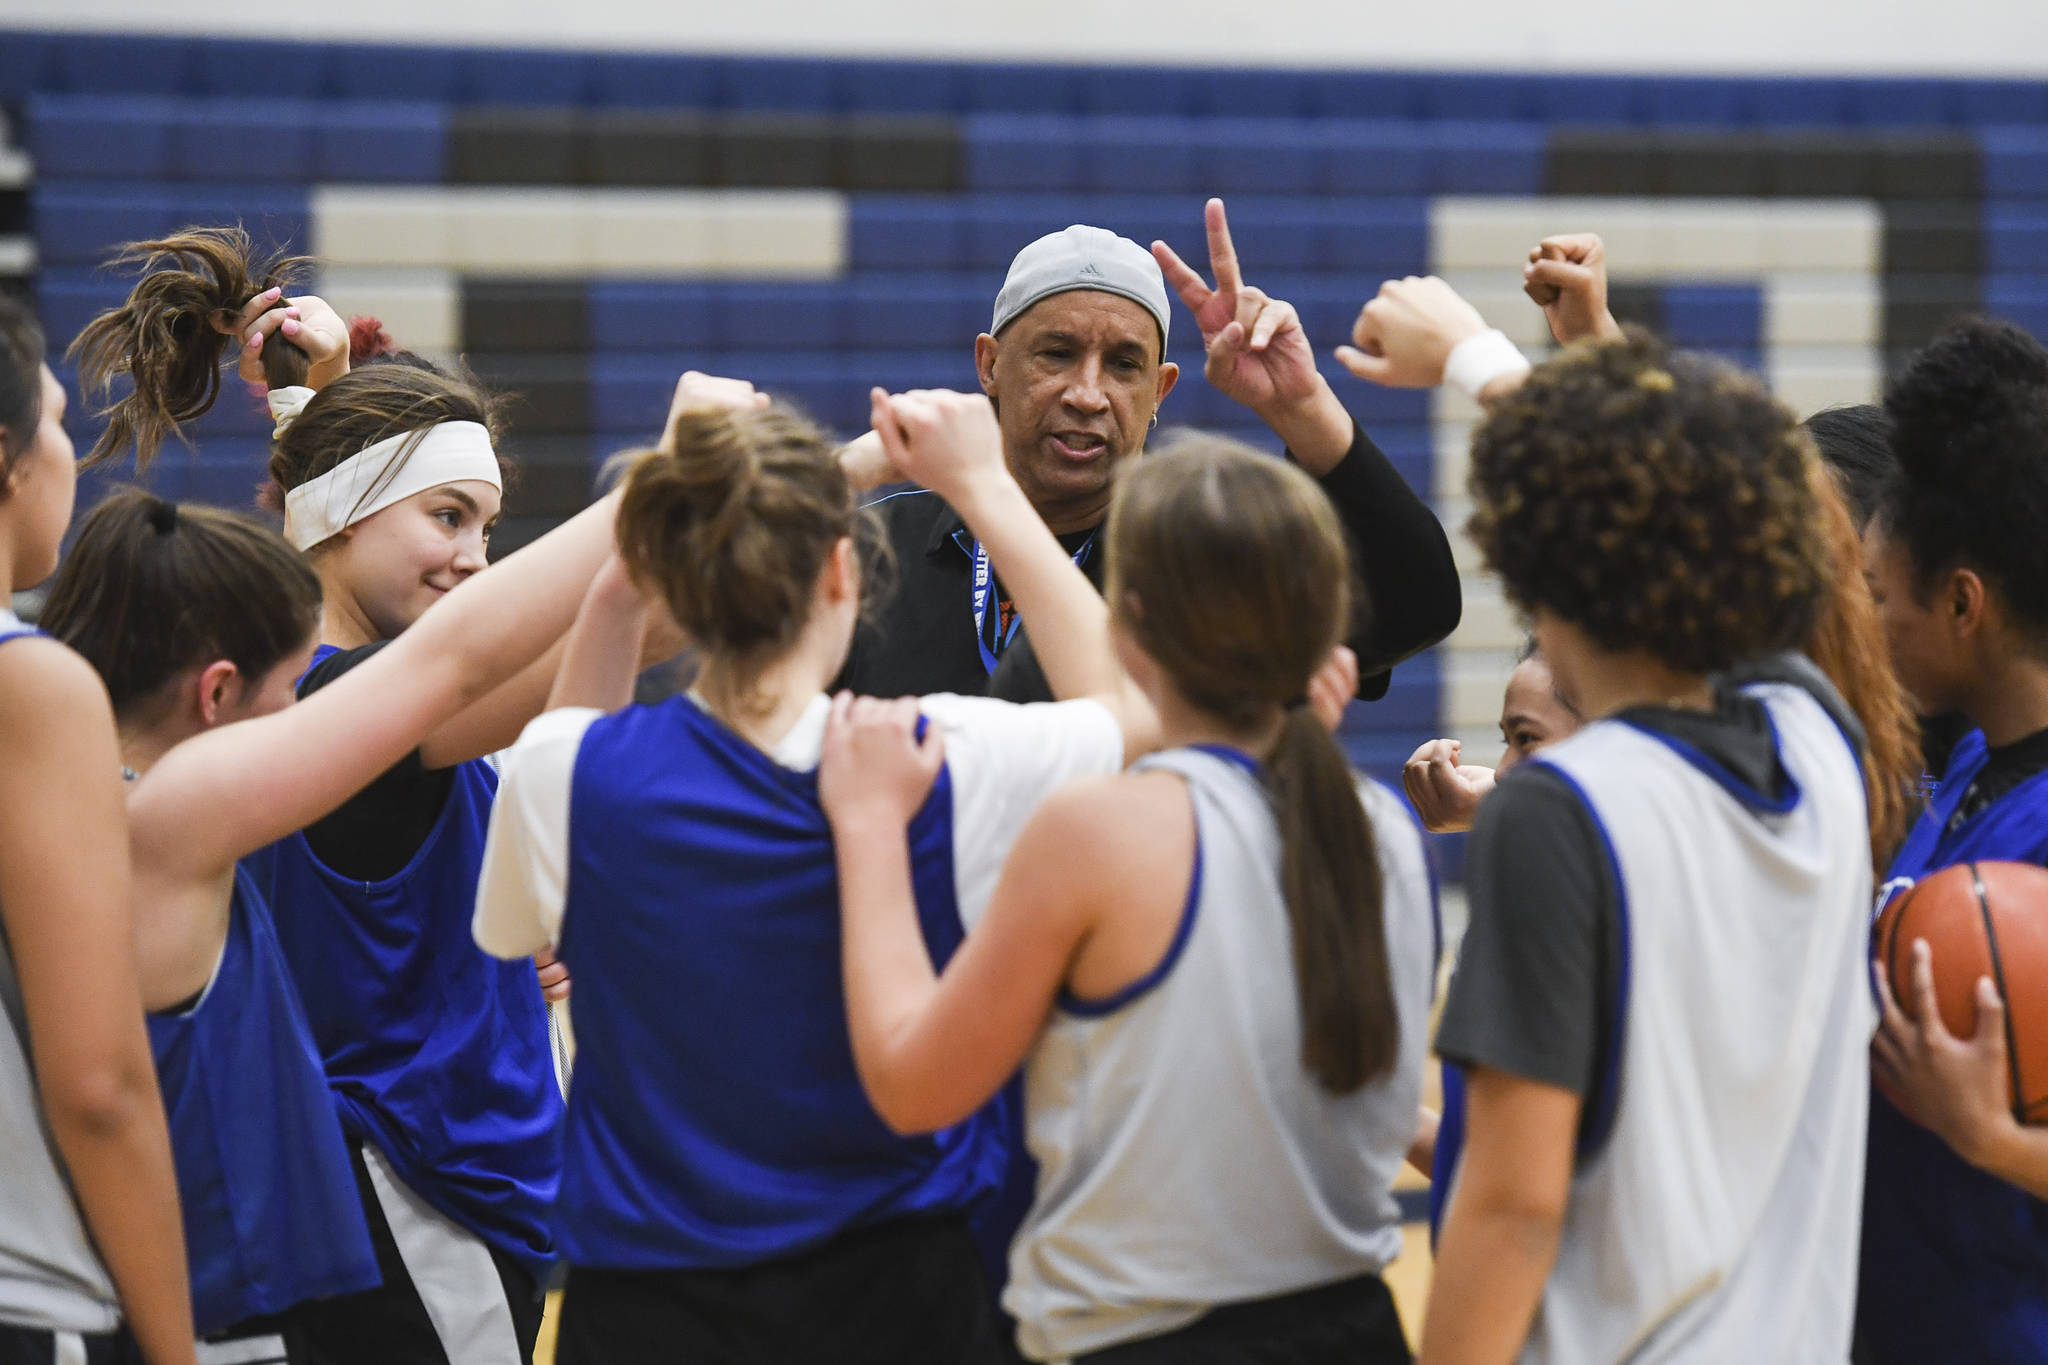 Coach Andy Lee gives starts off a cheer during the girls varsity basketball practice at Thunder Mountain High School on Monday, Dec. 9, 2019. (Michael Penn | Juneau Empire)